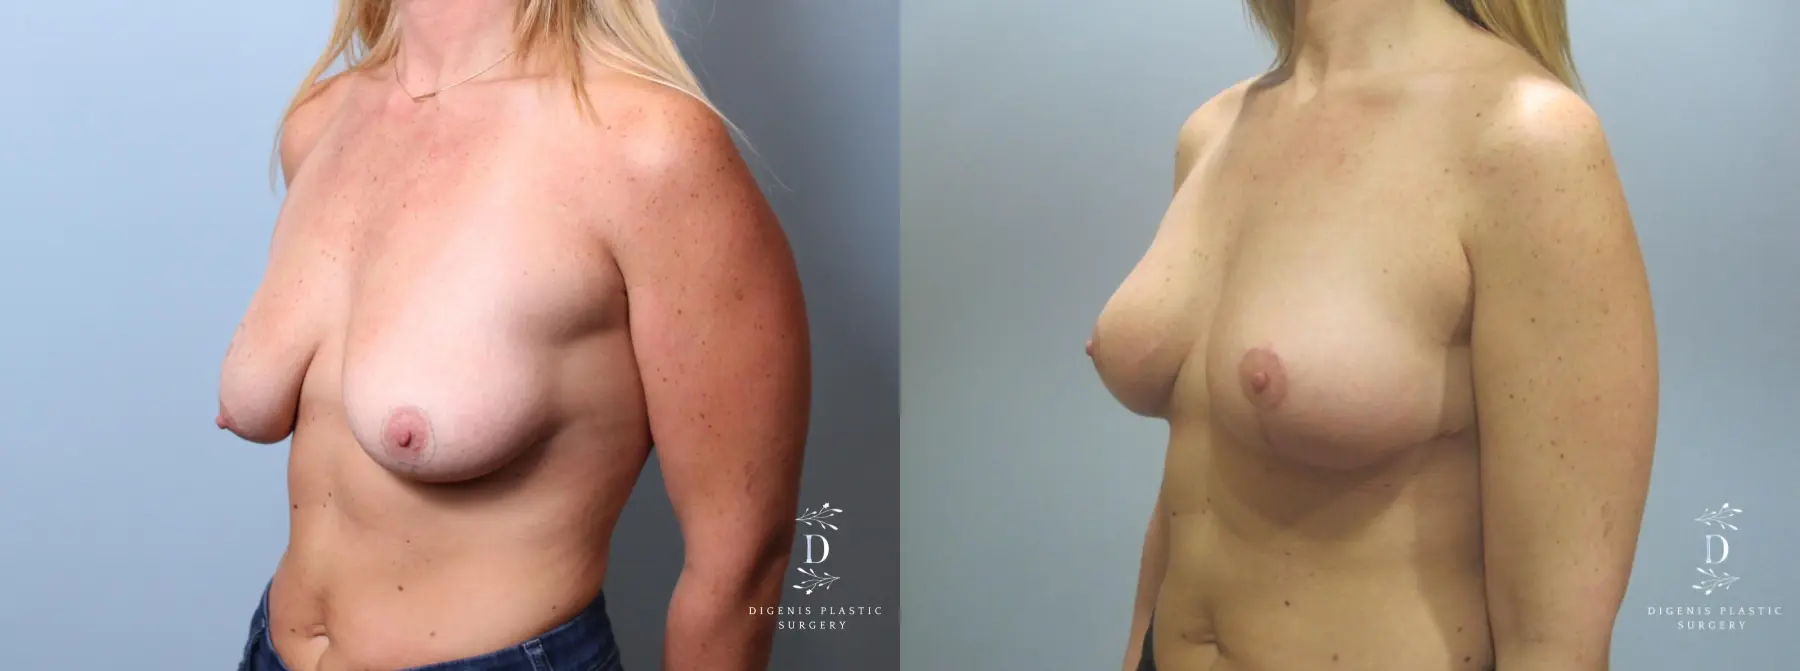 Breast Lift: Patient 7 - Before and After 4